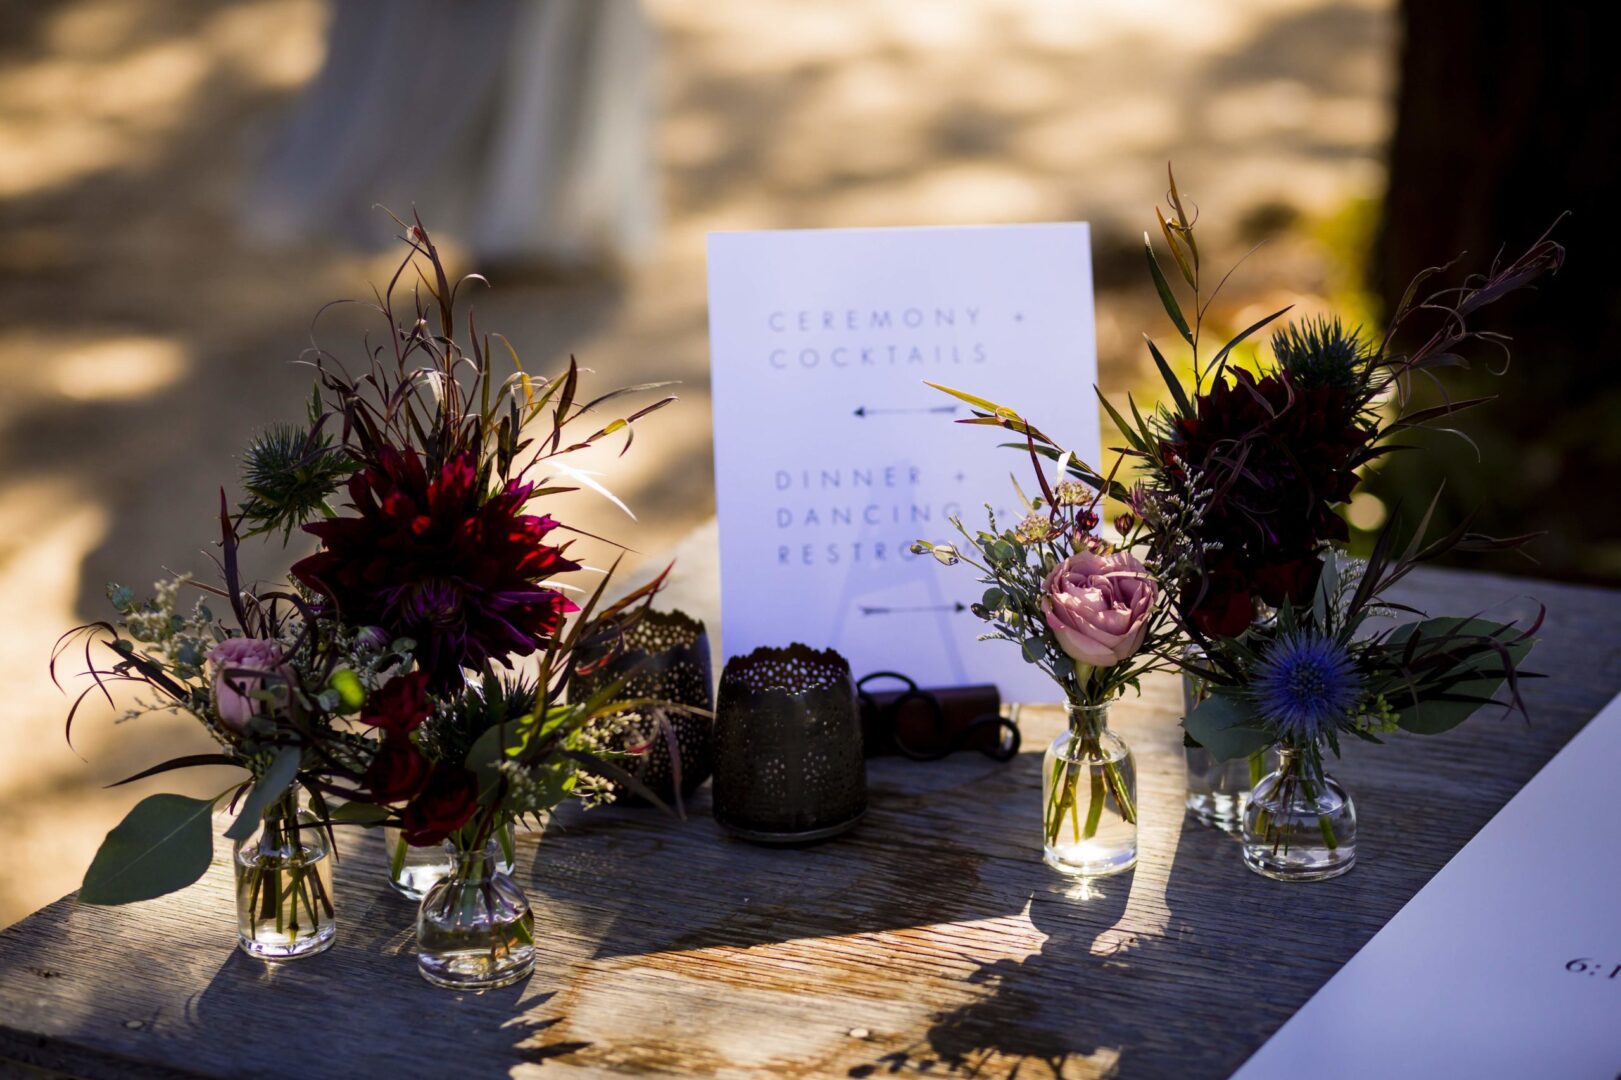 A table with flowers and a sign on it.